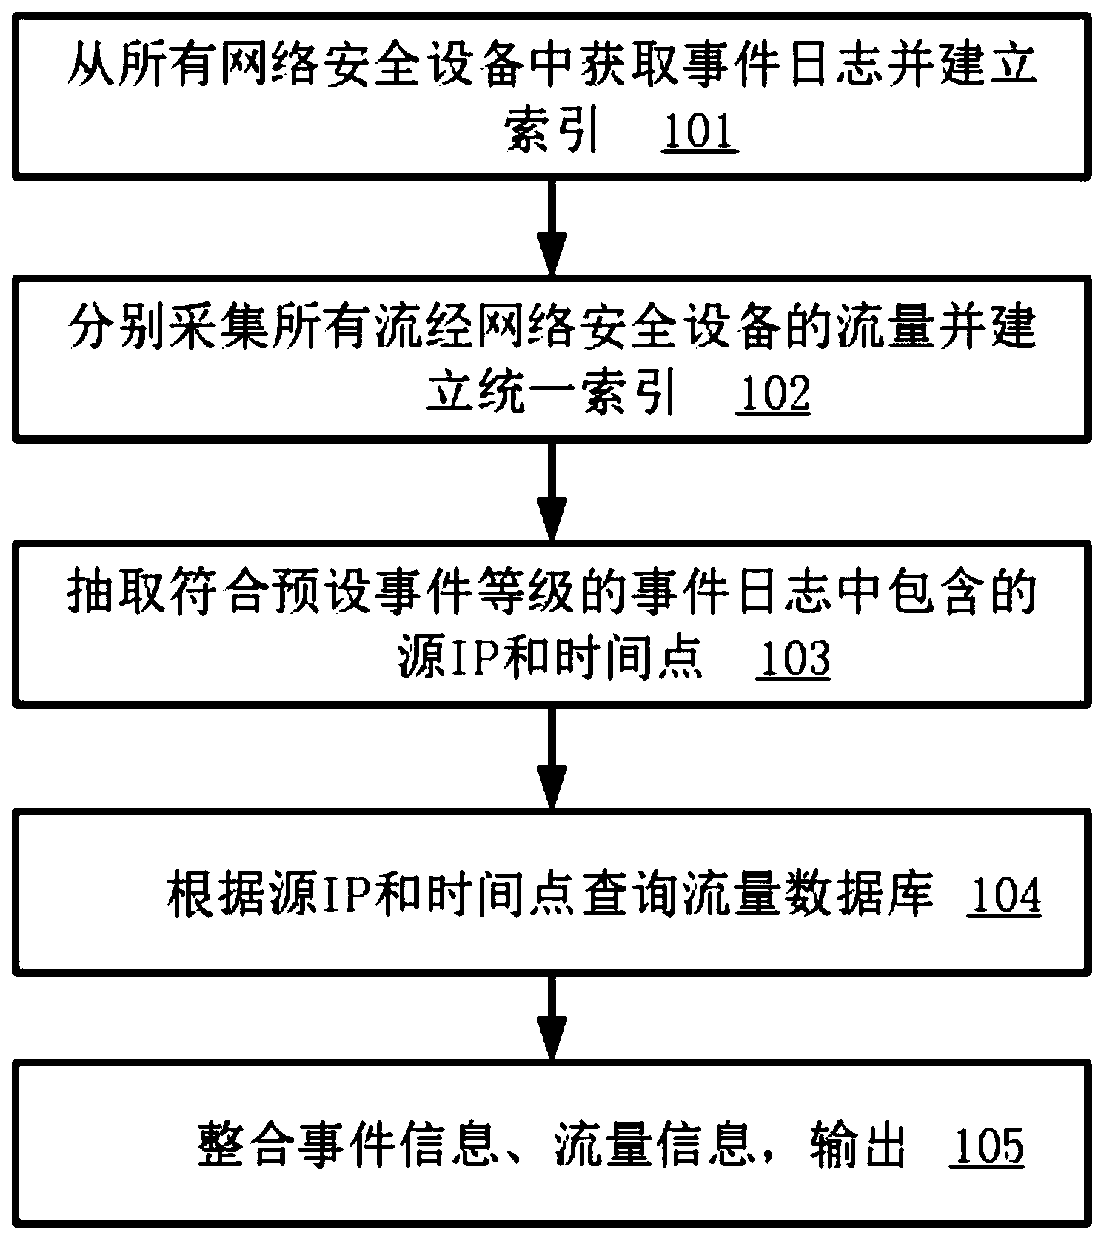 Network system event tracing method and system based on log and flow collection